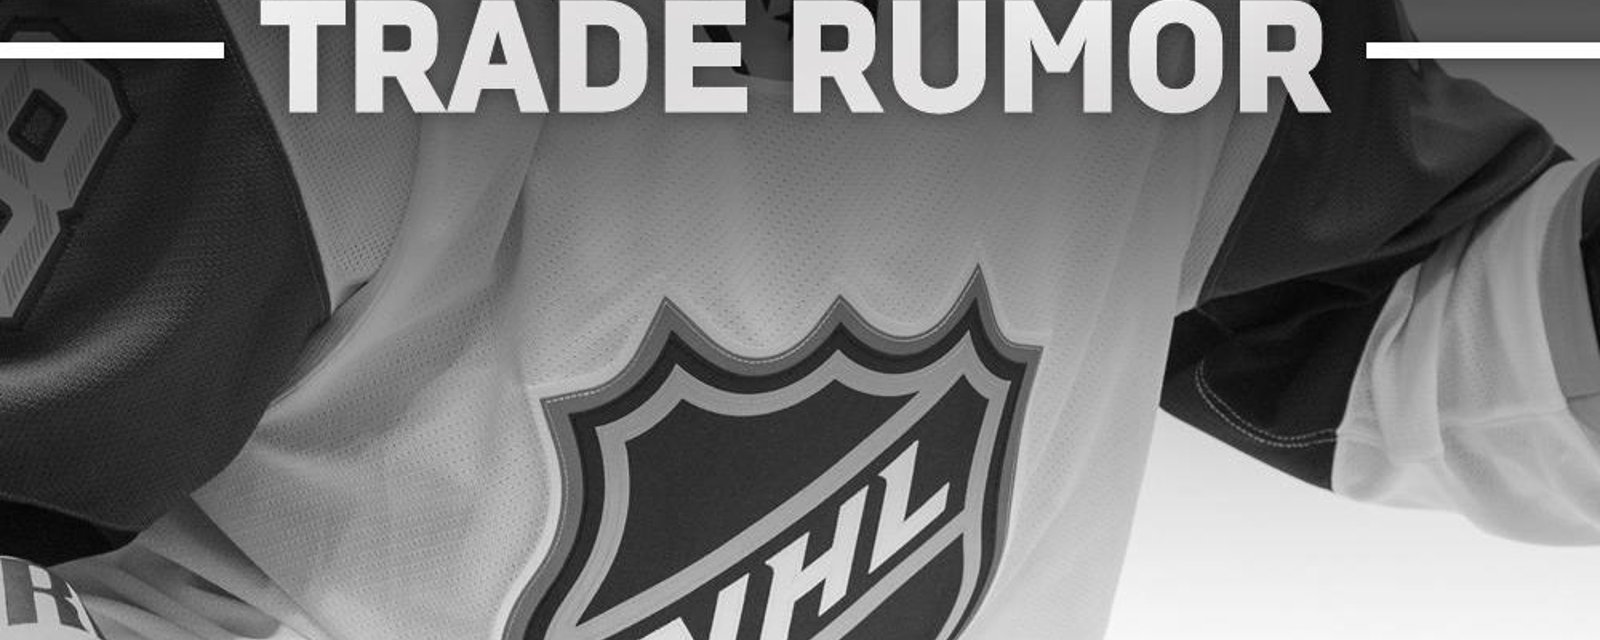 Rumor: Team willing to trade highly skilled defenseman but the price is high.